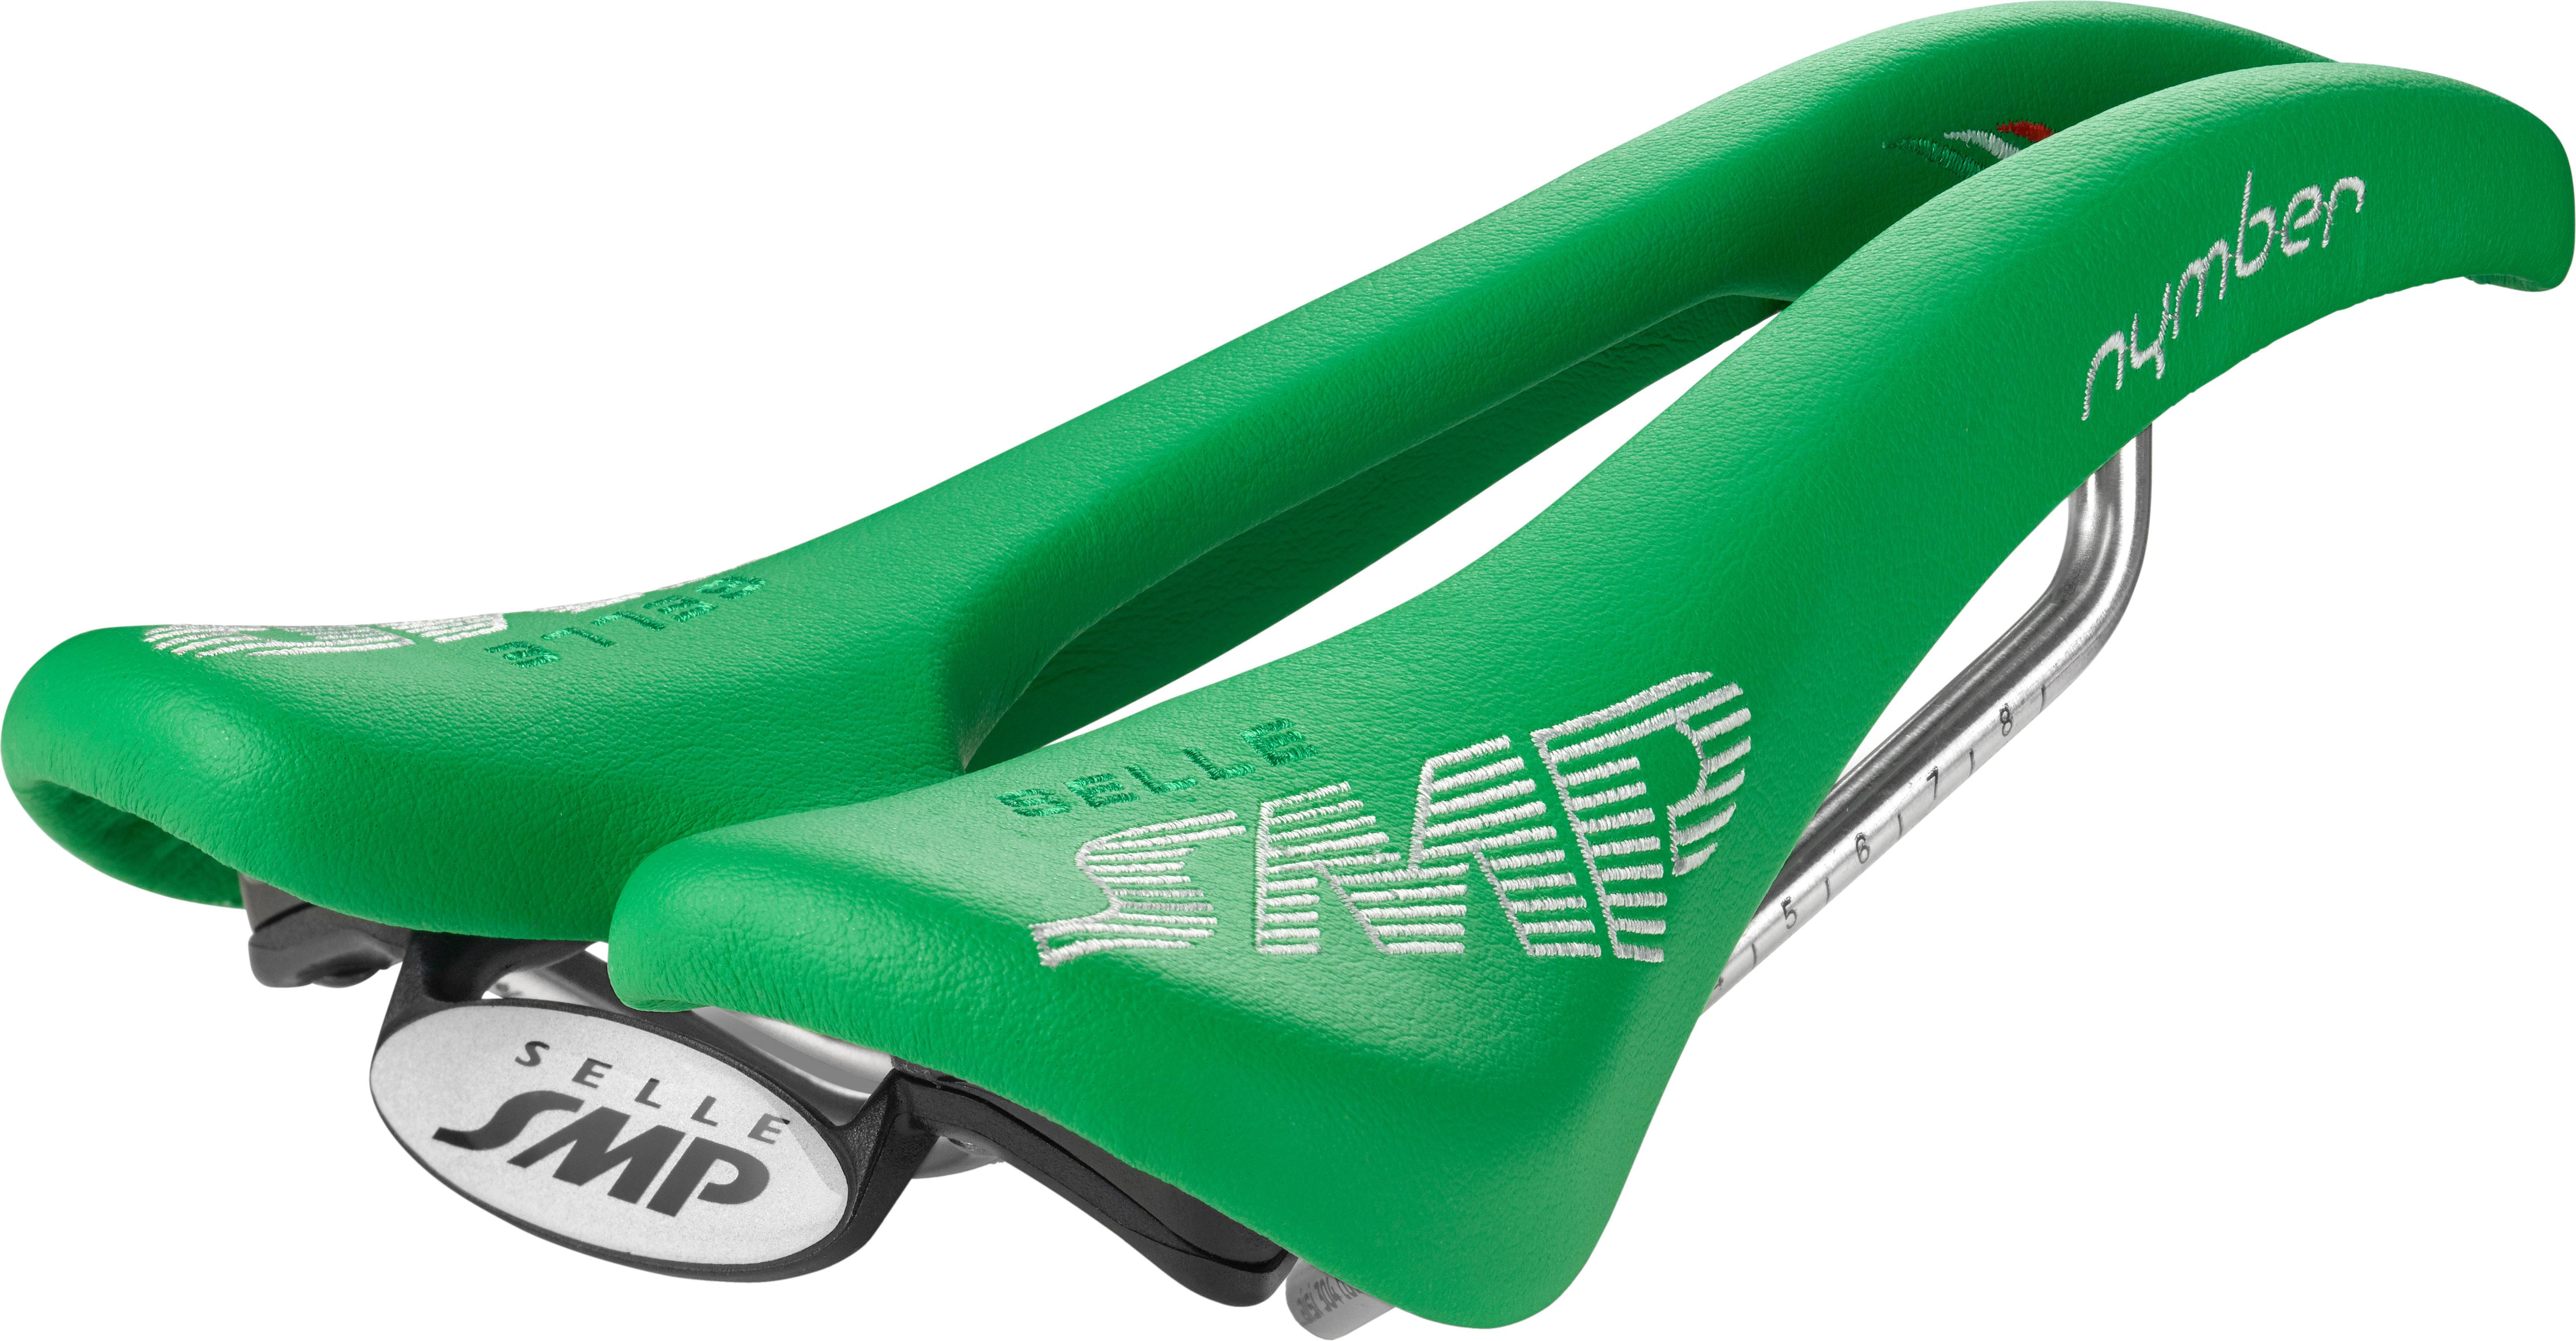 Selle Smp Nymber Saddle - Italian Green